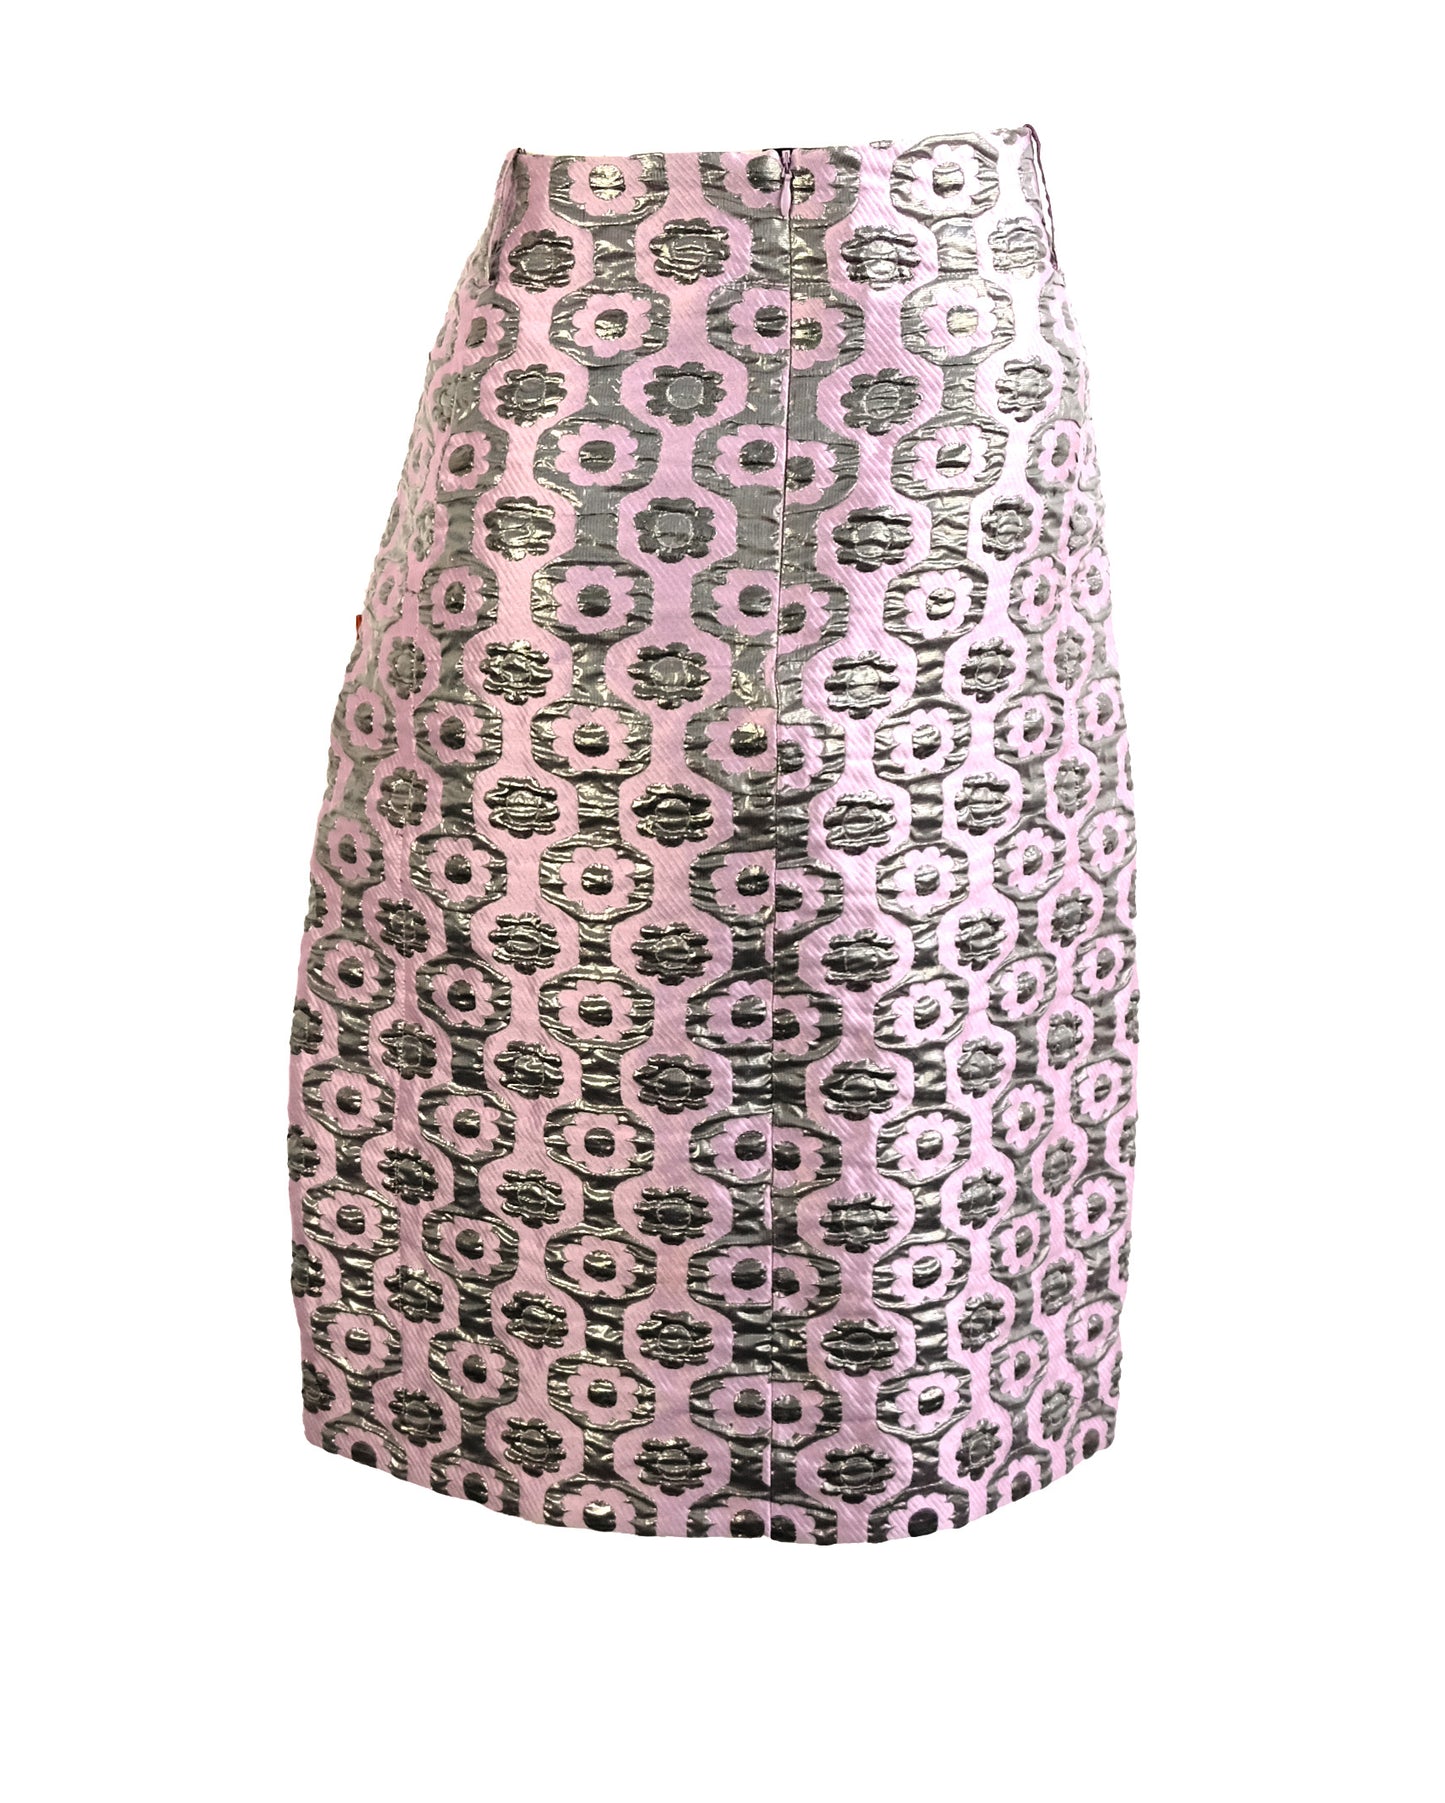 Marni Skirt in Pink and Silver Brocade with Orange Leather Trim, UK12